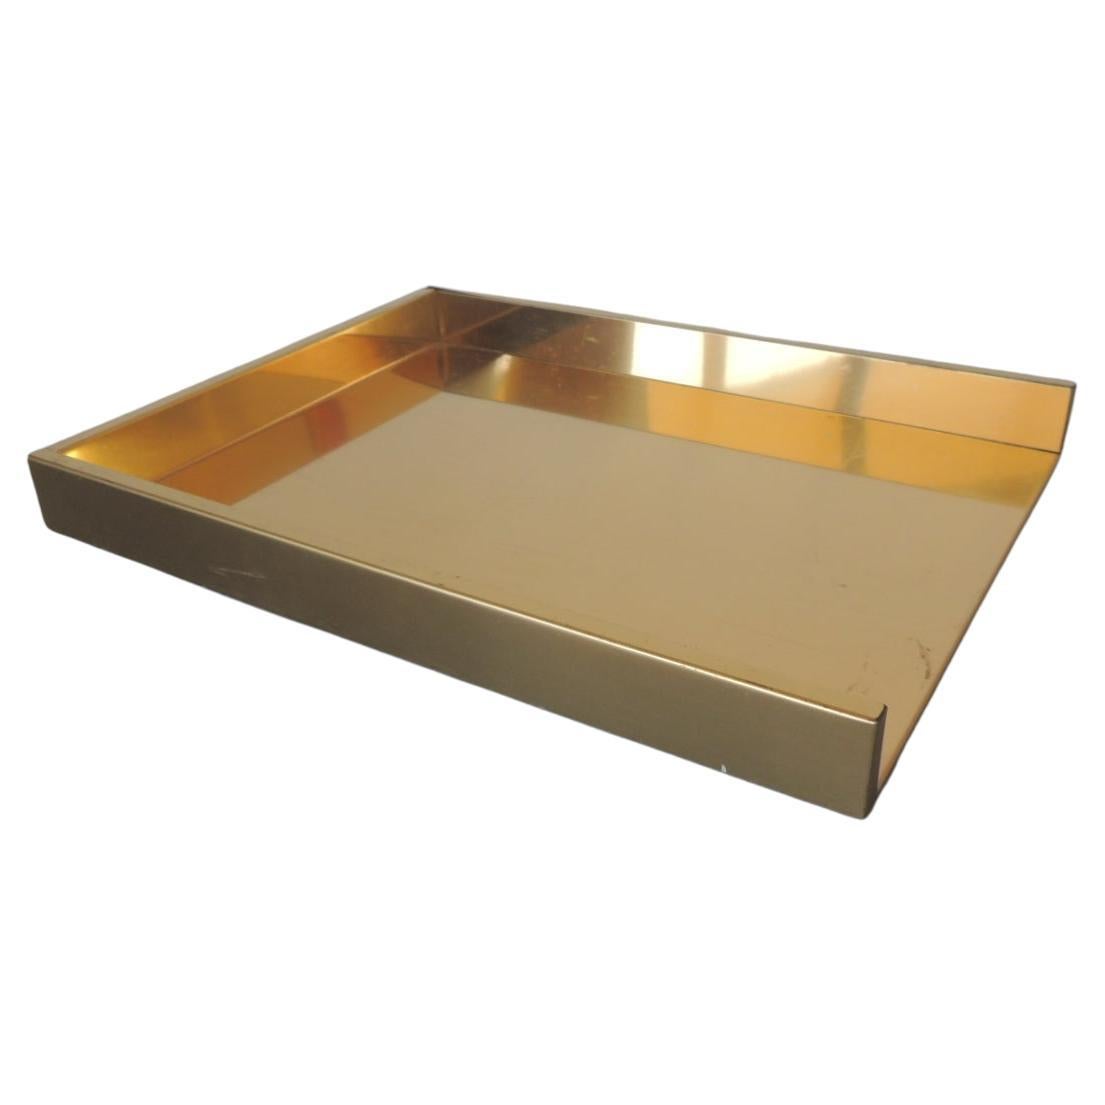 Midcentury-Modern Style Gold Tone Desk Letter Tray